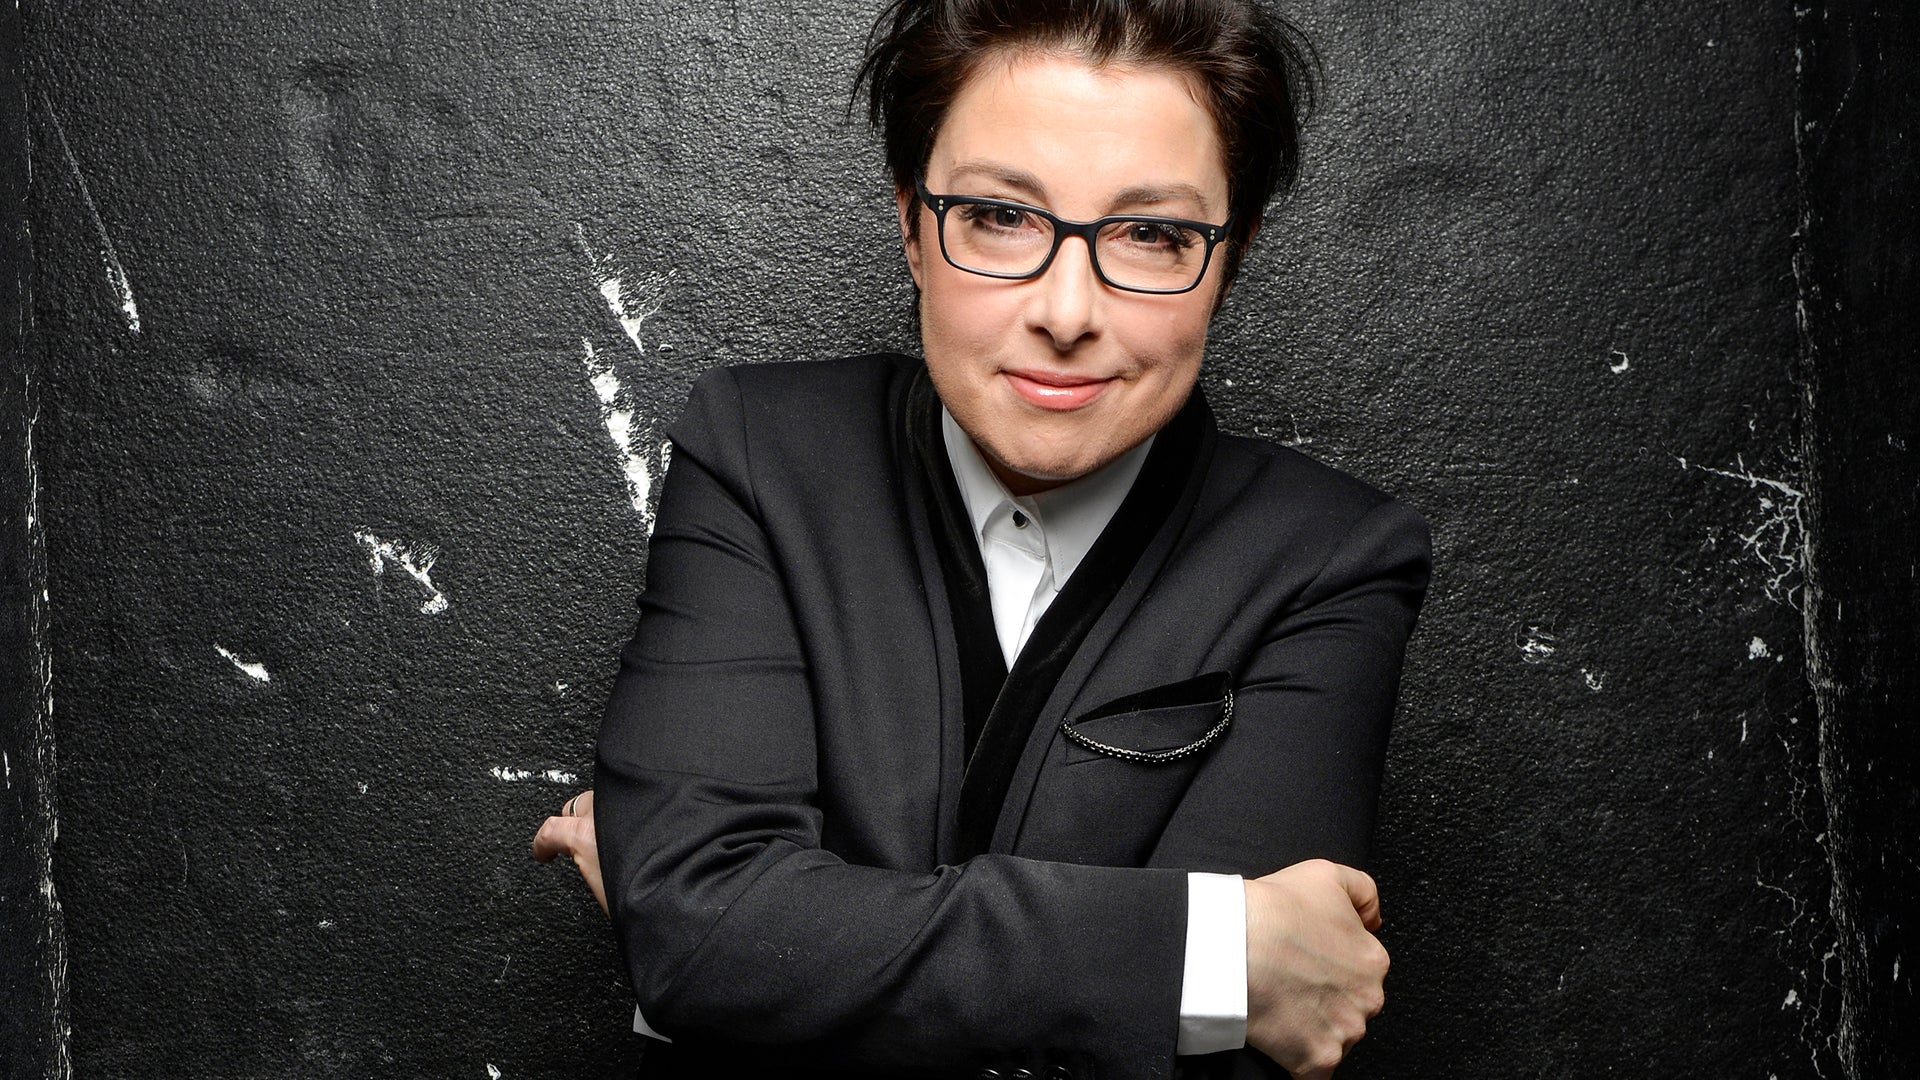 Image for Sue Perkins, Nish Kumar and other UK comedians are playing Dungeons & Dragons next week for Comic Relief